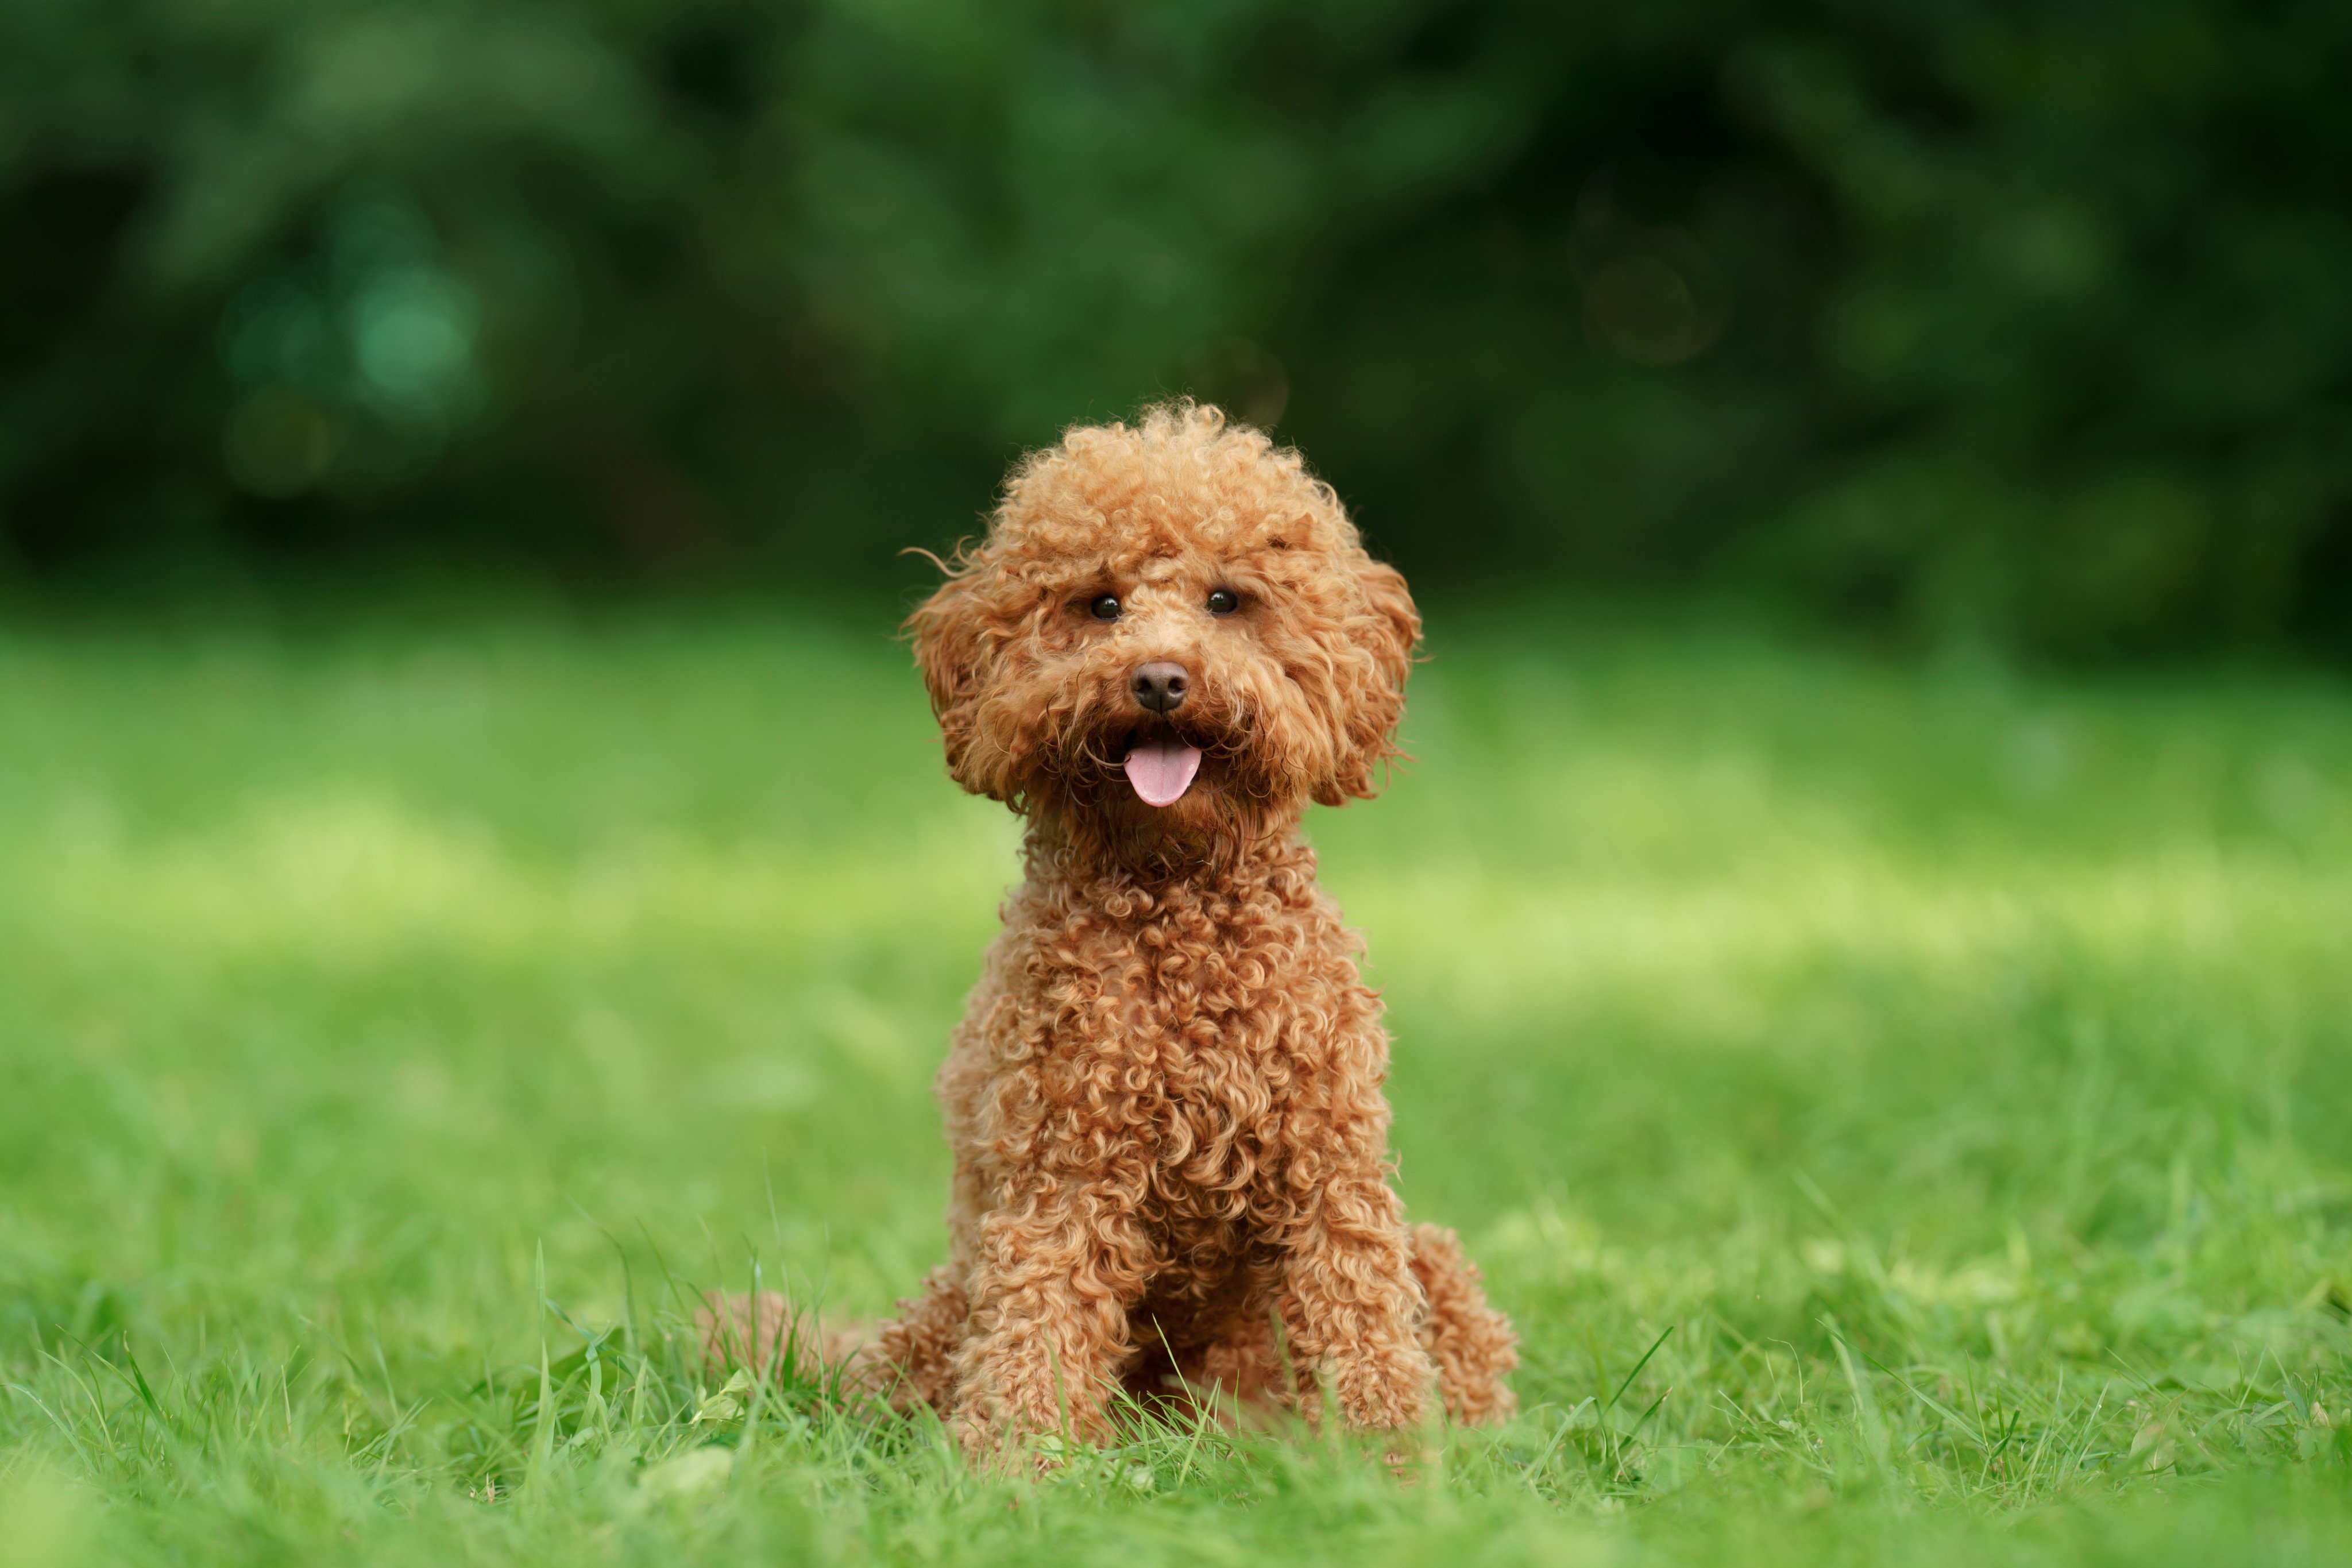 A domestic helper in Singapore is accused of beating a pet poodle to death. Photo: Shutterstock